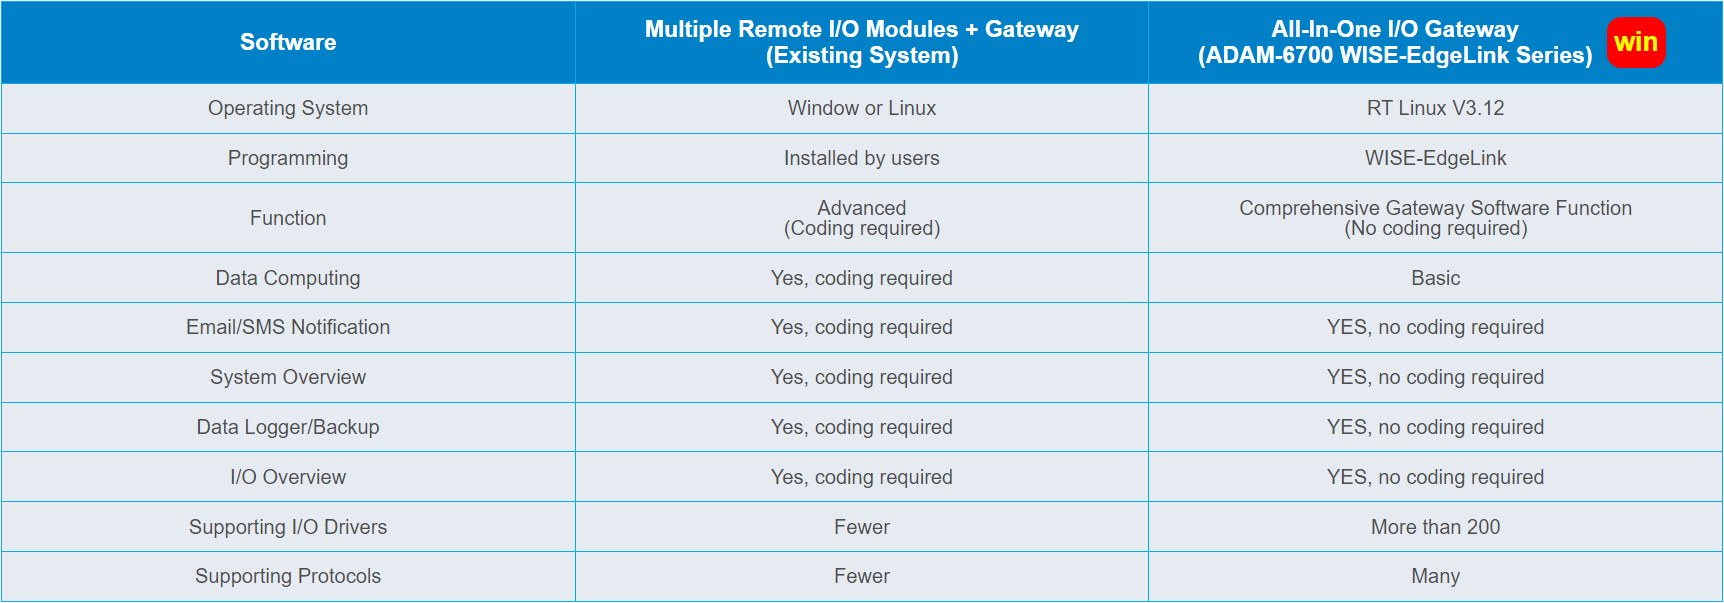 Benefits Comparison of Existing System vs. All-in-One I/O Gateway